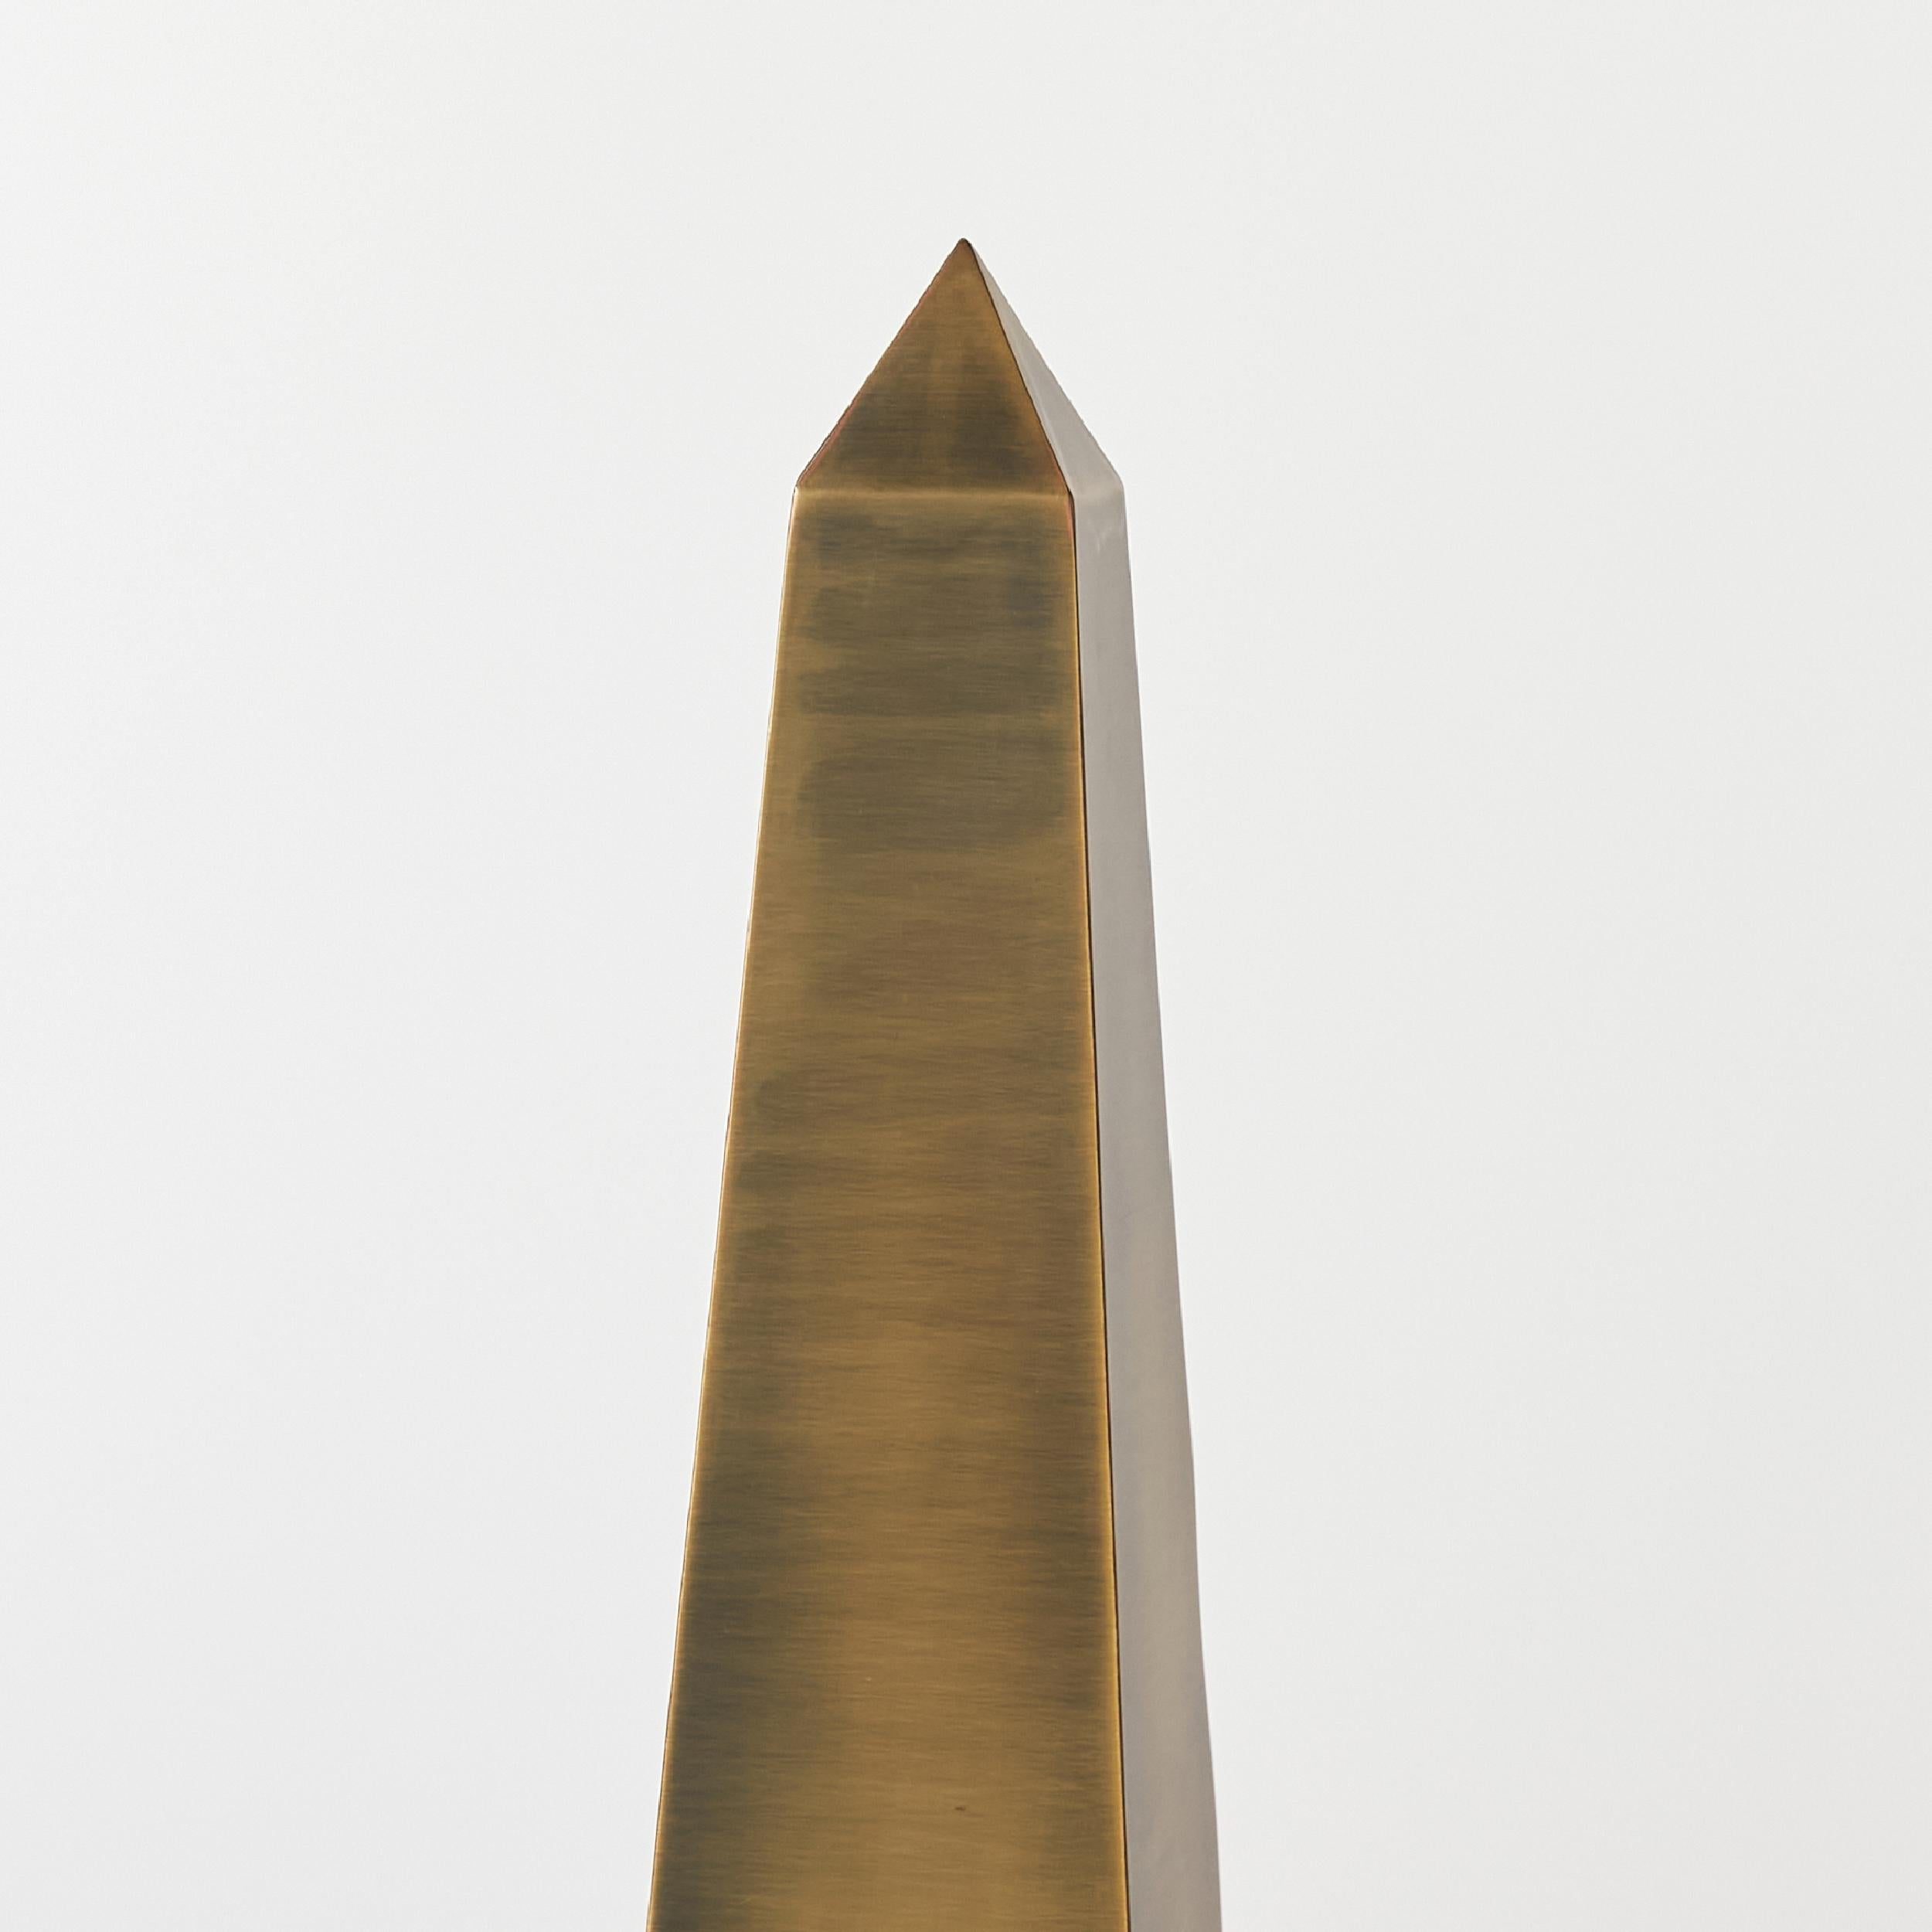 Mid-Century Modern Brass Obelisk Refinished in Antique Bronze Finish from Gimbels Department Store For Sale